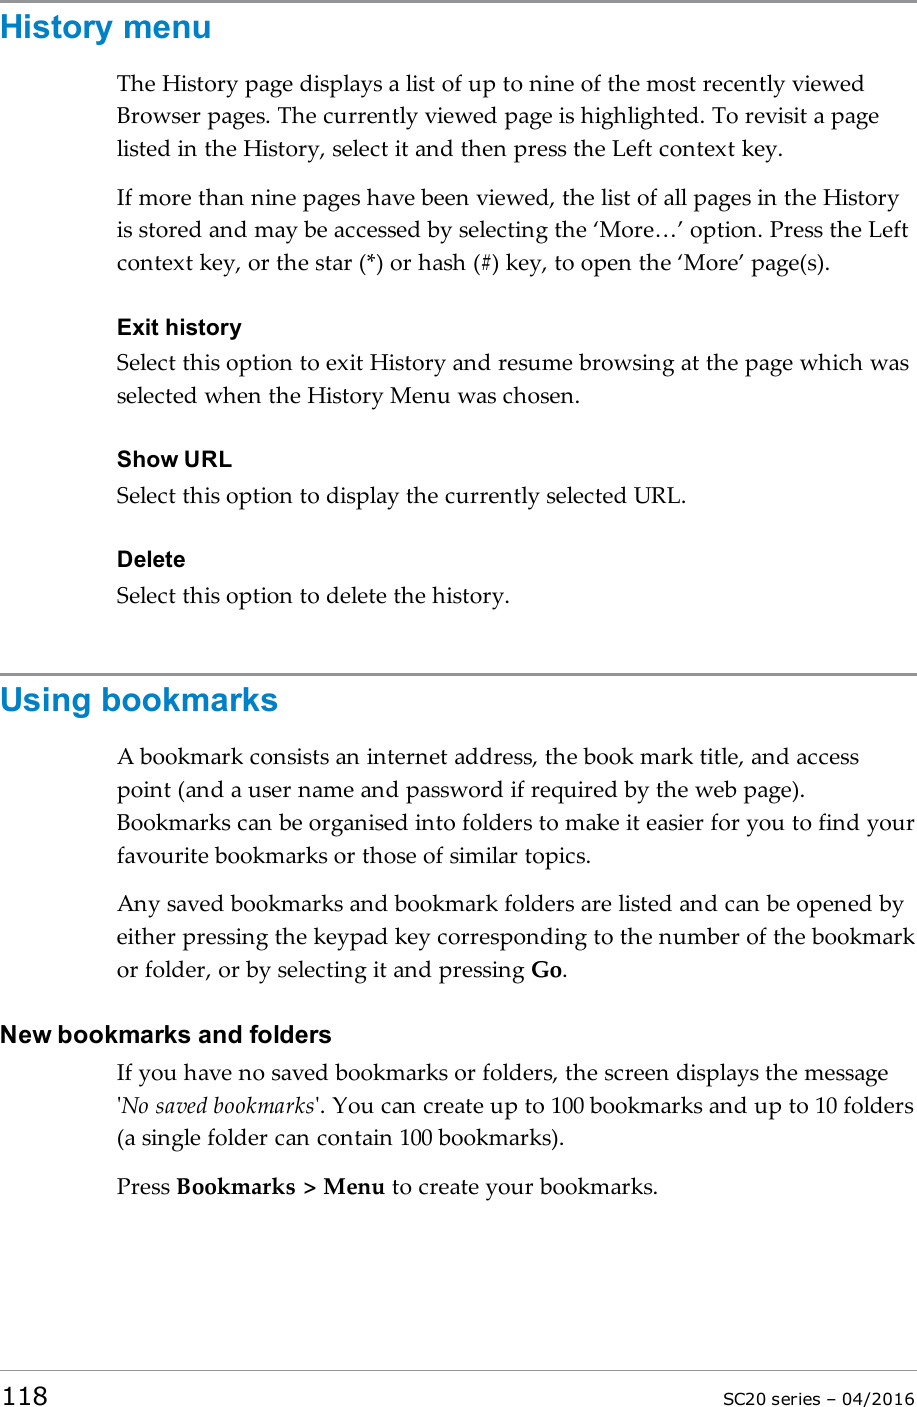 History menuThe History page displays a list of up to nine of the most recently viewedBrowser pages. The currently viewed page is highlighted. To revisit a pagelisted in the History, select it and then press the Left context key.If more than nine pages have been viewed, the list of all pages in the Historyis stored and may be accessed by selecting the ‘More…’ option. Press the Leftcontext key, or the star (*) or hash (#) key, to open the ‘More’ page(s).Exit historySelect this option to exit History and resume browsing at the page which wasselected when the History Menu was chosen.Show URLSelect this option to display the currently selected URL.DeleteSelect this option to delete the history.Using bookmarksA bookmark consists an internet address, the book mark title, and accesspoint (and a user name and password if required by the web page).Bookmarks can be organised into folders to make it easier for you to find yourfavourite bookmarks or those of similar topics.Any saved bookmarks and bookmark folders are listed and can be opened byeither pressing the keypad key corresponding to the number of the bookmarkor folder, or by selecting it and pressing Go.New bookmarks and foldersIf you have no saved bookmarks or folders, the screen displays the message&apos;No saved bookmarks&apos;. You can create up to 100 bookmarks and up to 10 folders(a single folder can contain 100 bookmarks).Press Bookmarks &gt; Menu to create your bookmarks.118 SC20 series – 04/2016